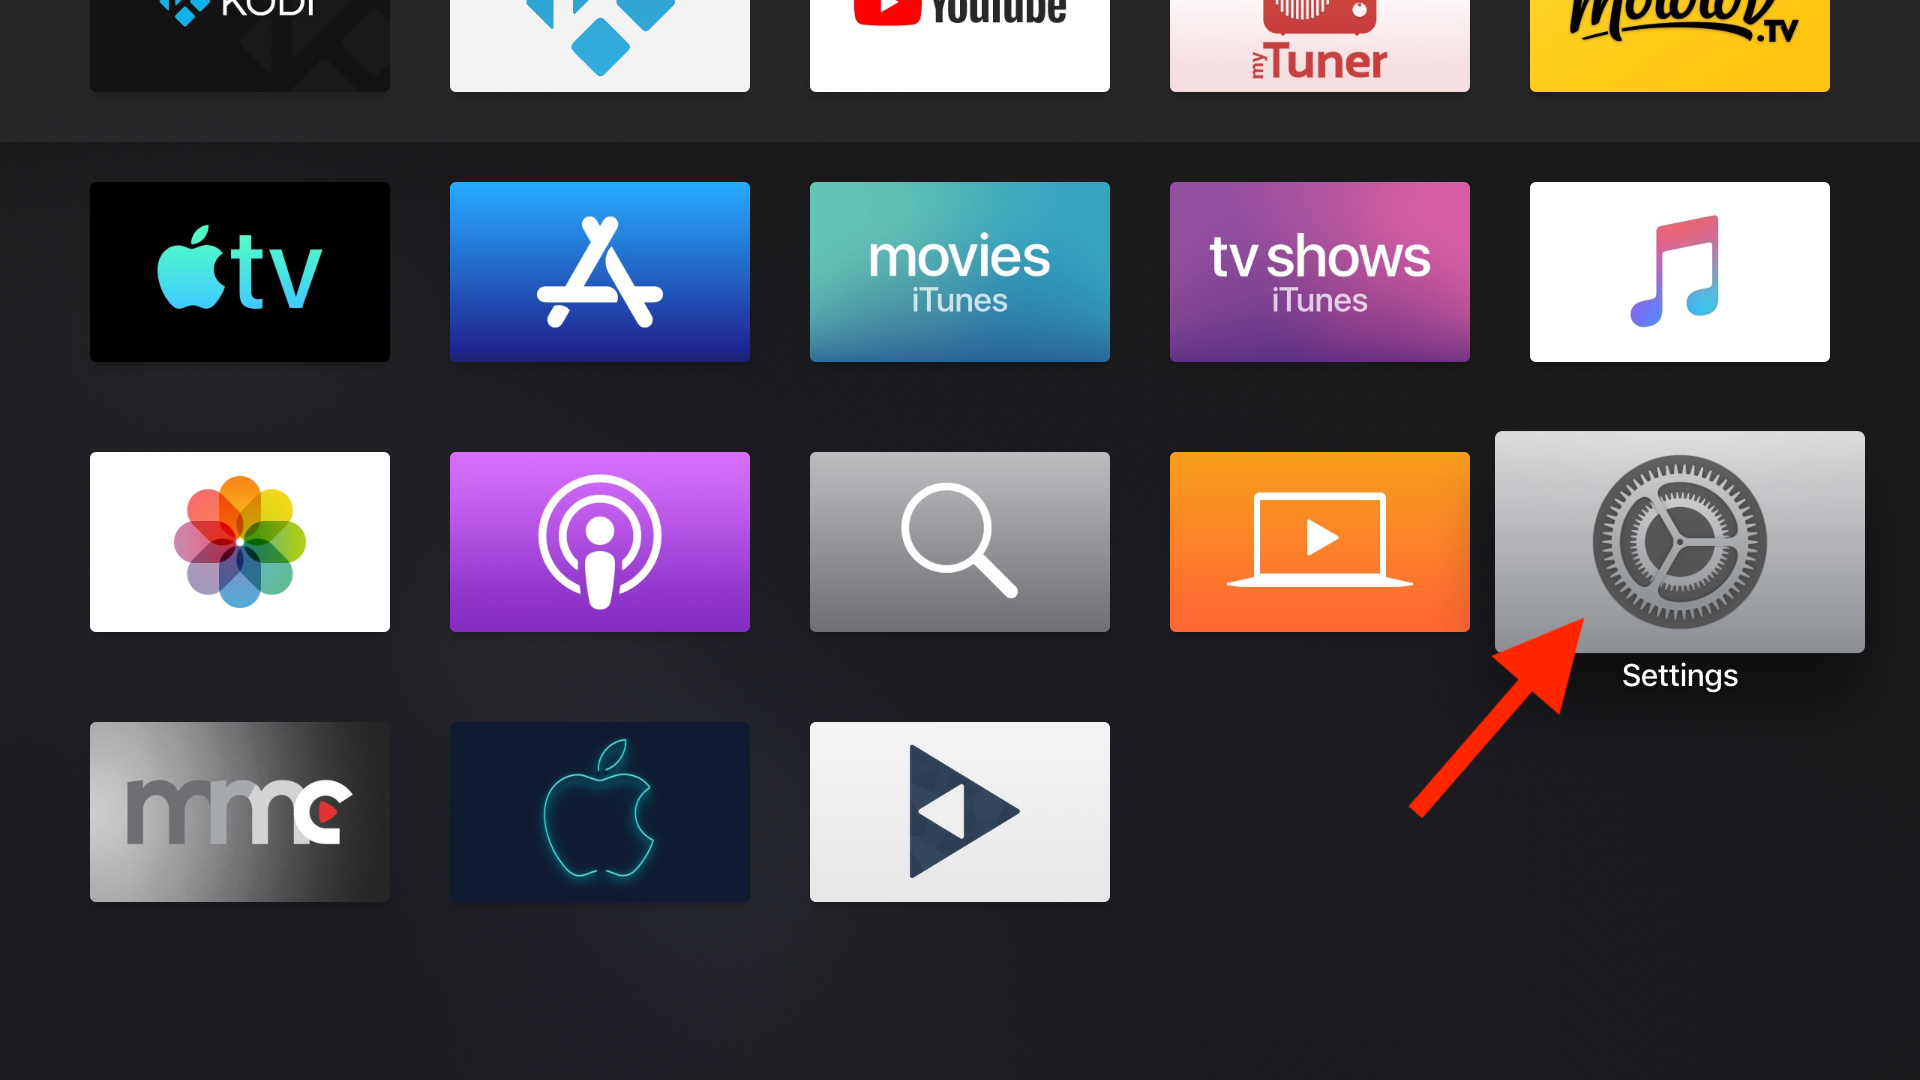 How to Install Apps on the Apple TV